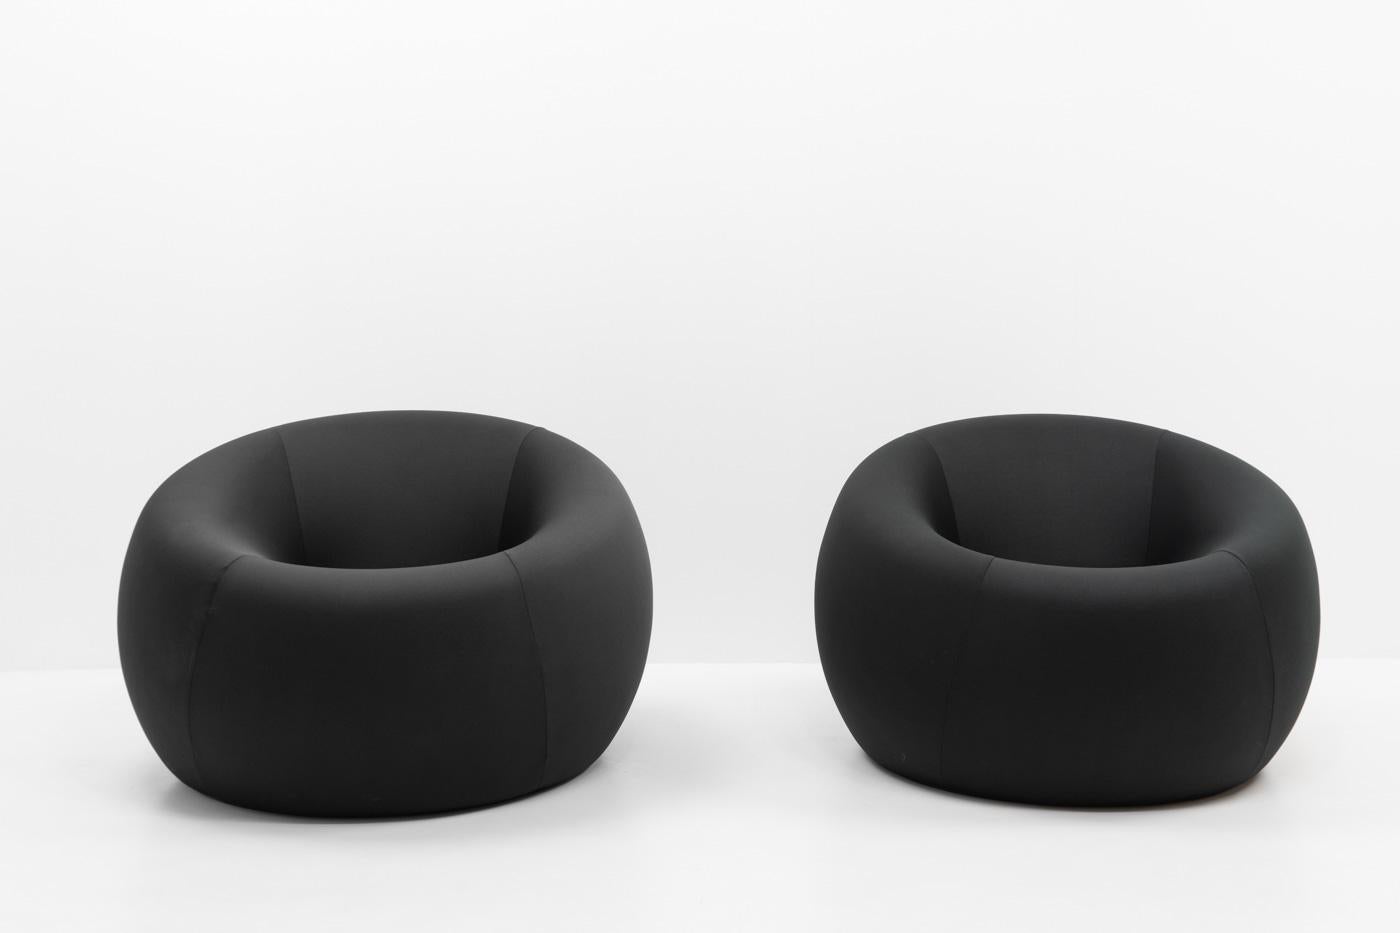 Contemporary UP1 Lounge Chairs by Gaetano Pesce for B&B Italia, 2000s For Sale